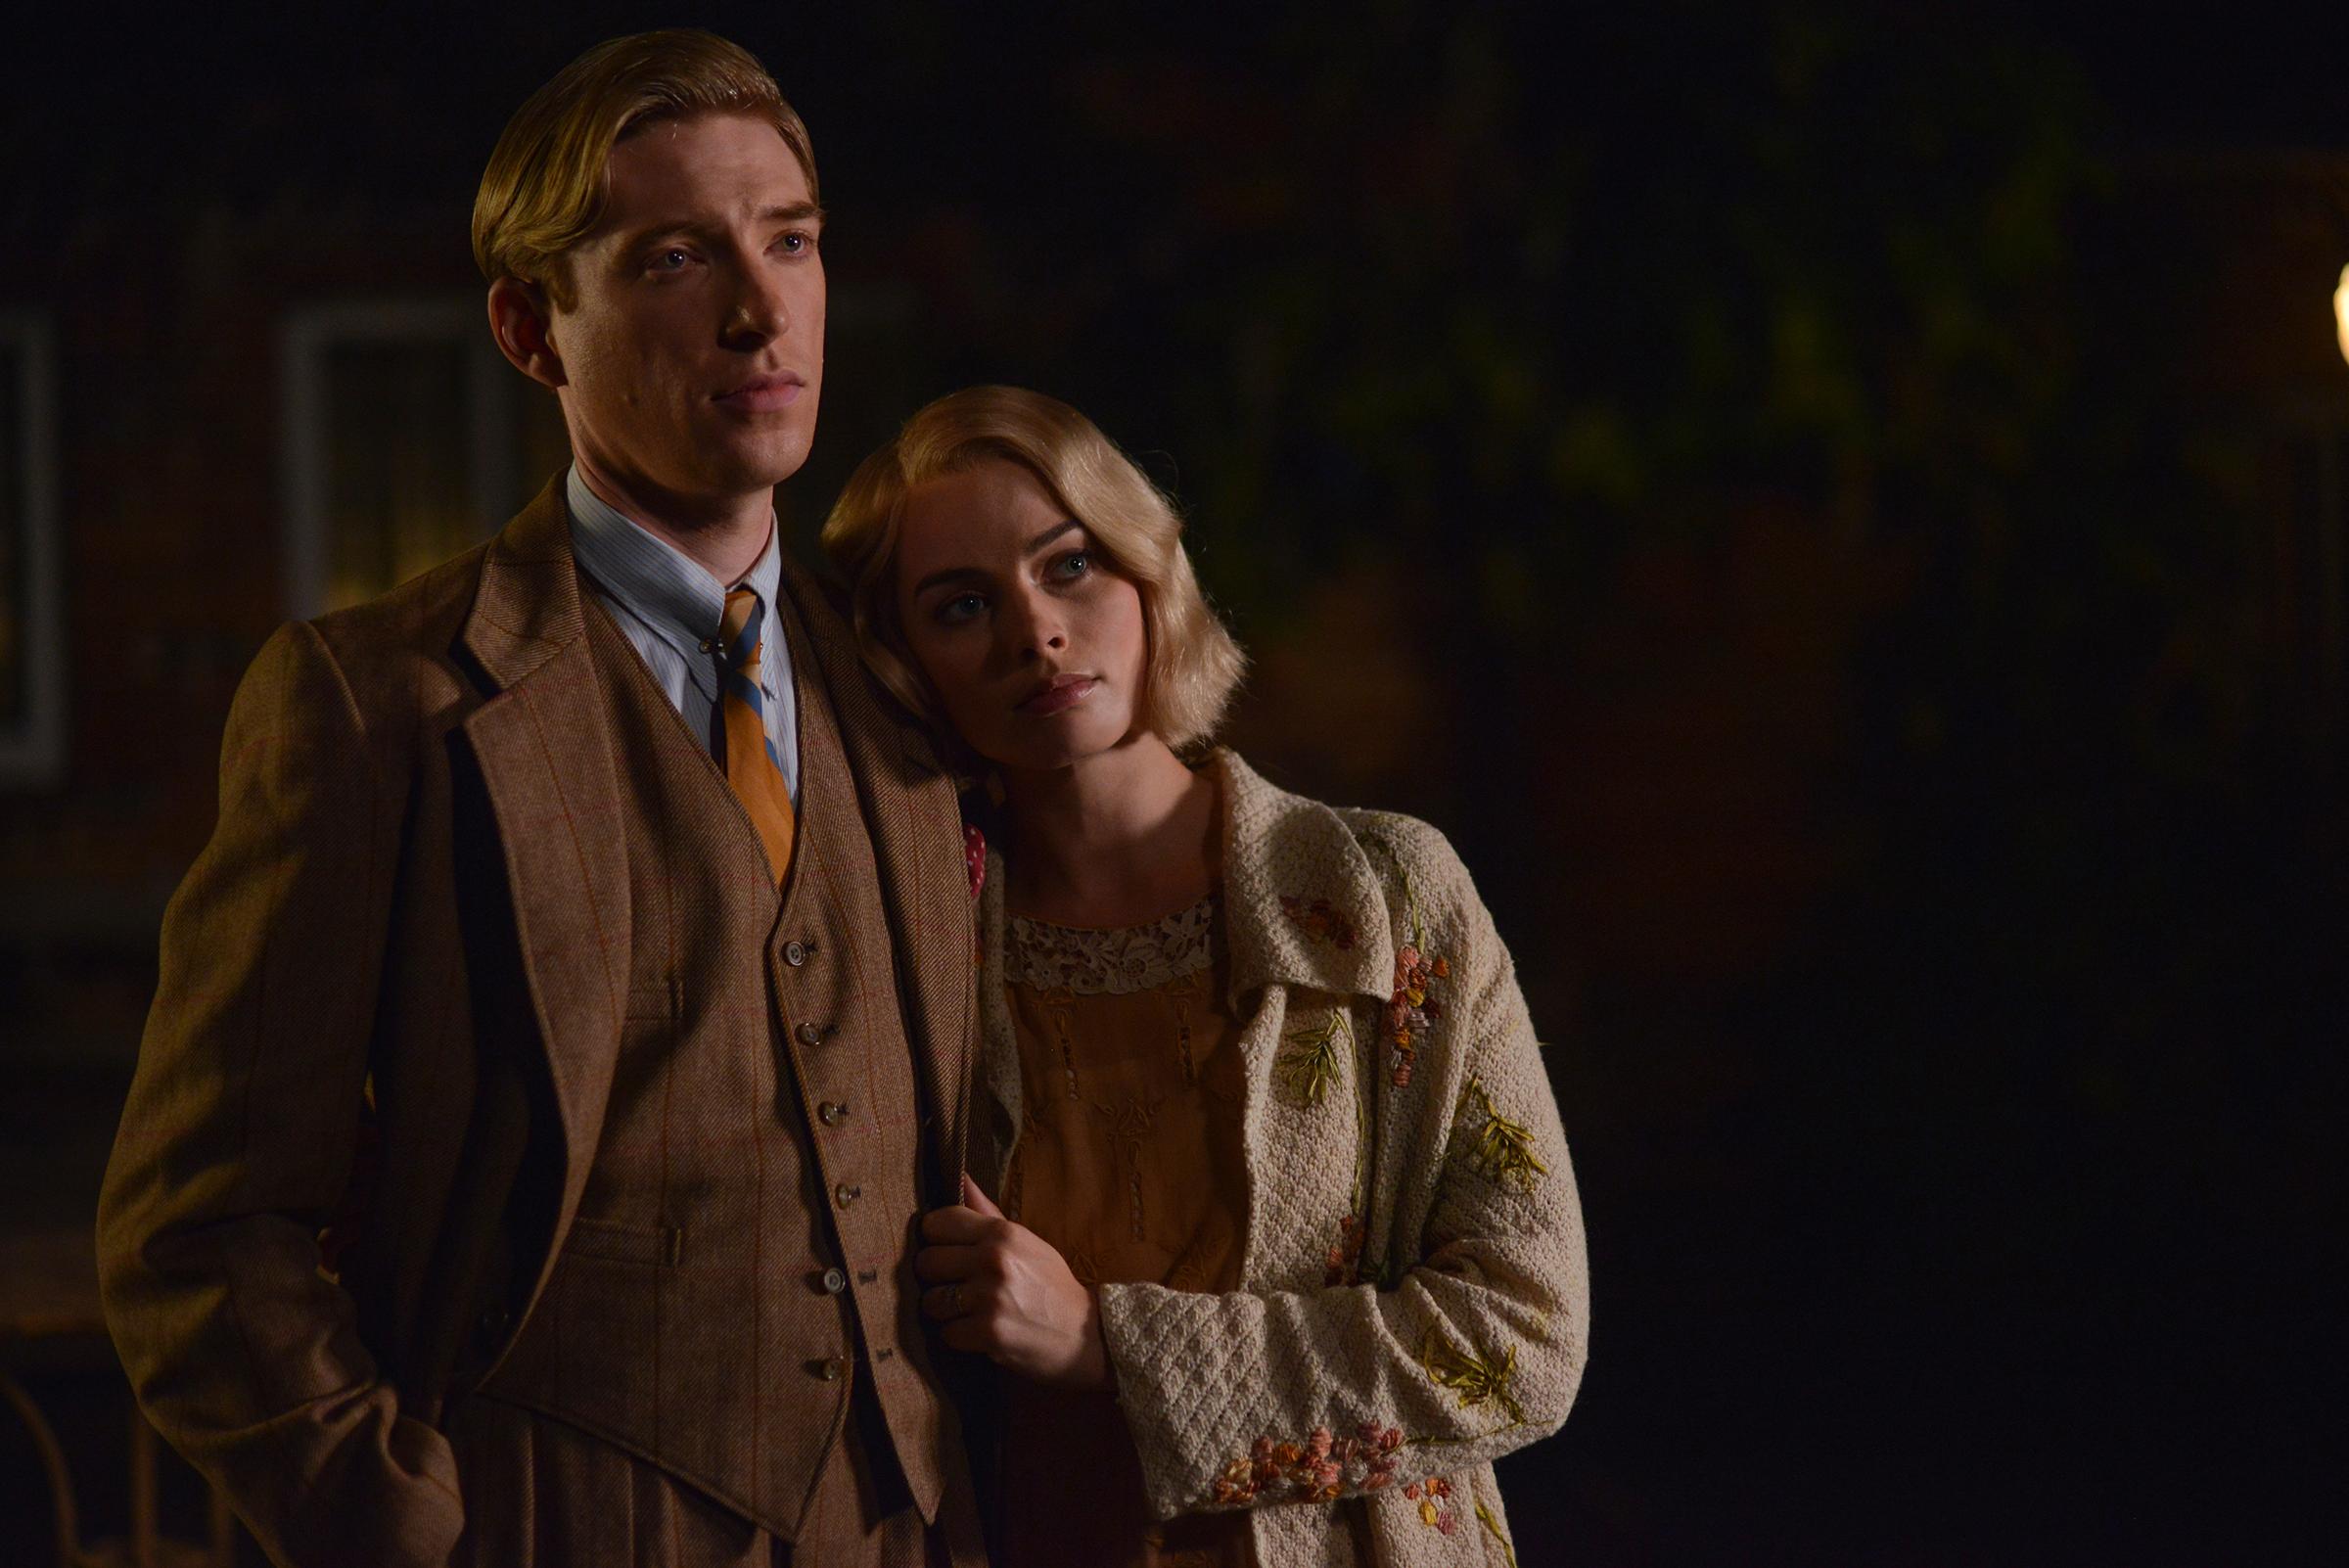 Domhnall Gleeson as 'Alan Milne' and Margot Robbie as 'Daphne Milne' in the film UNTITLED A.A. MILNE